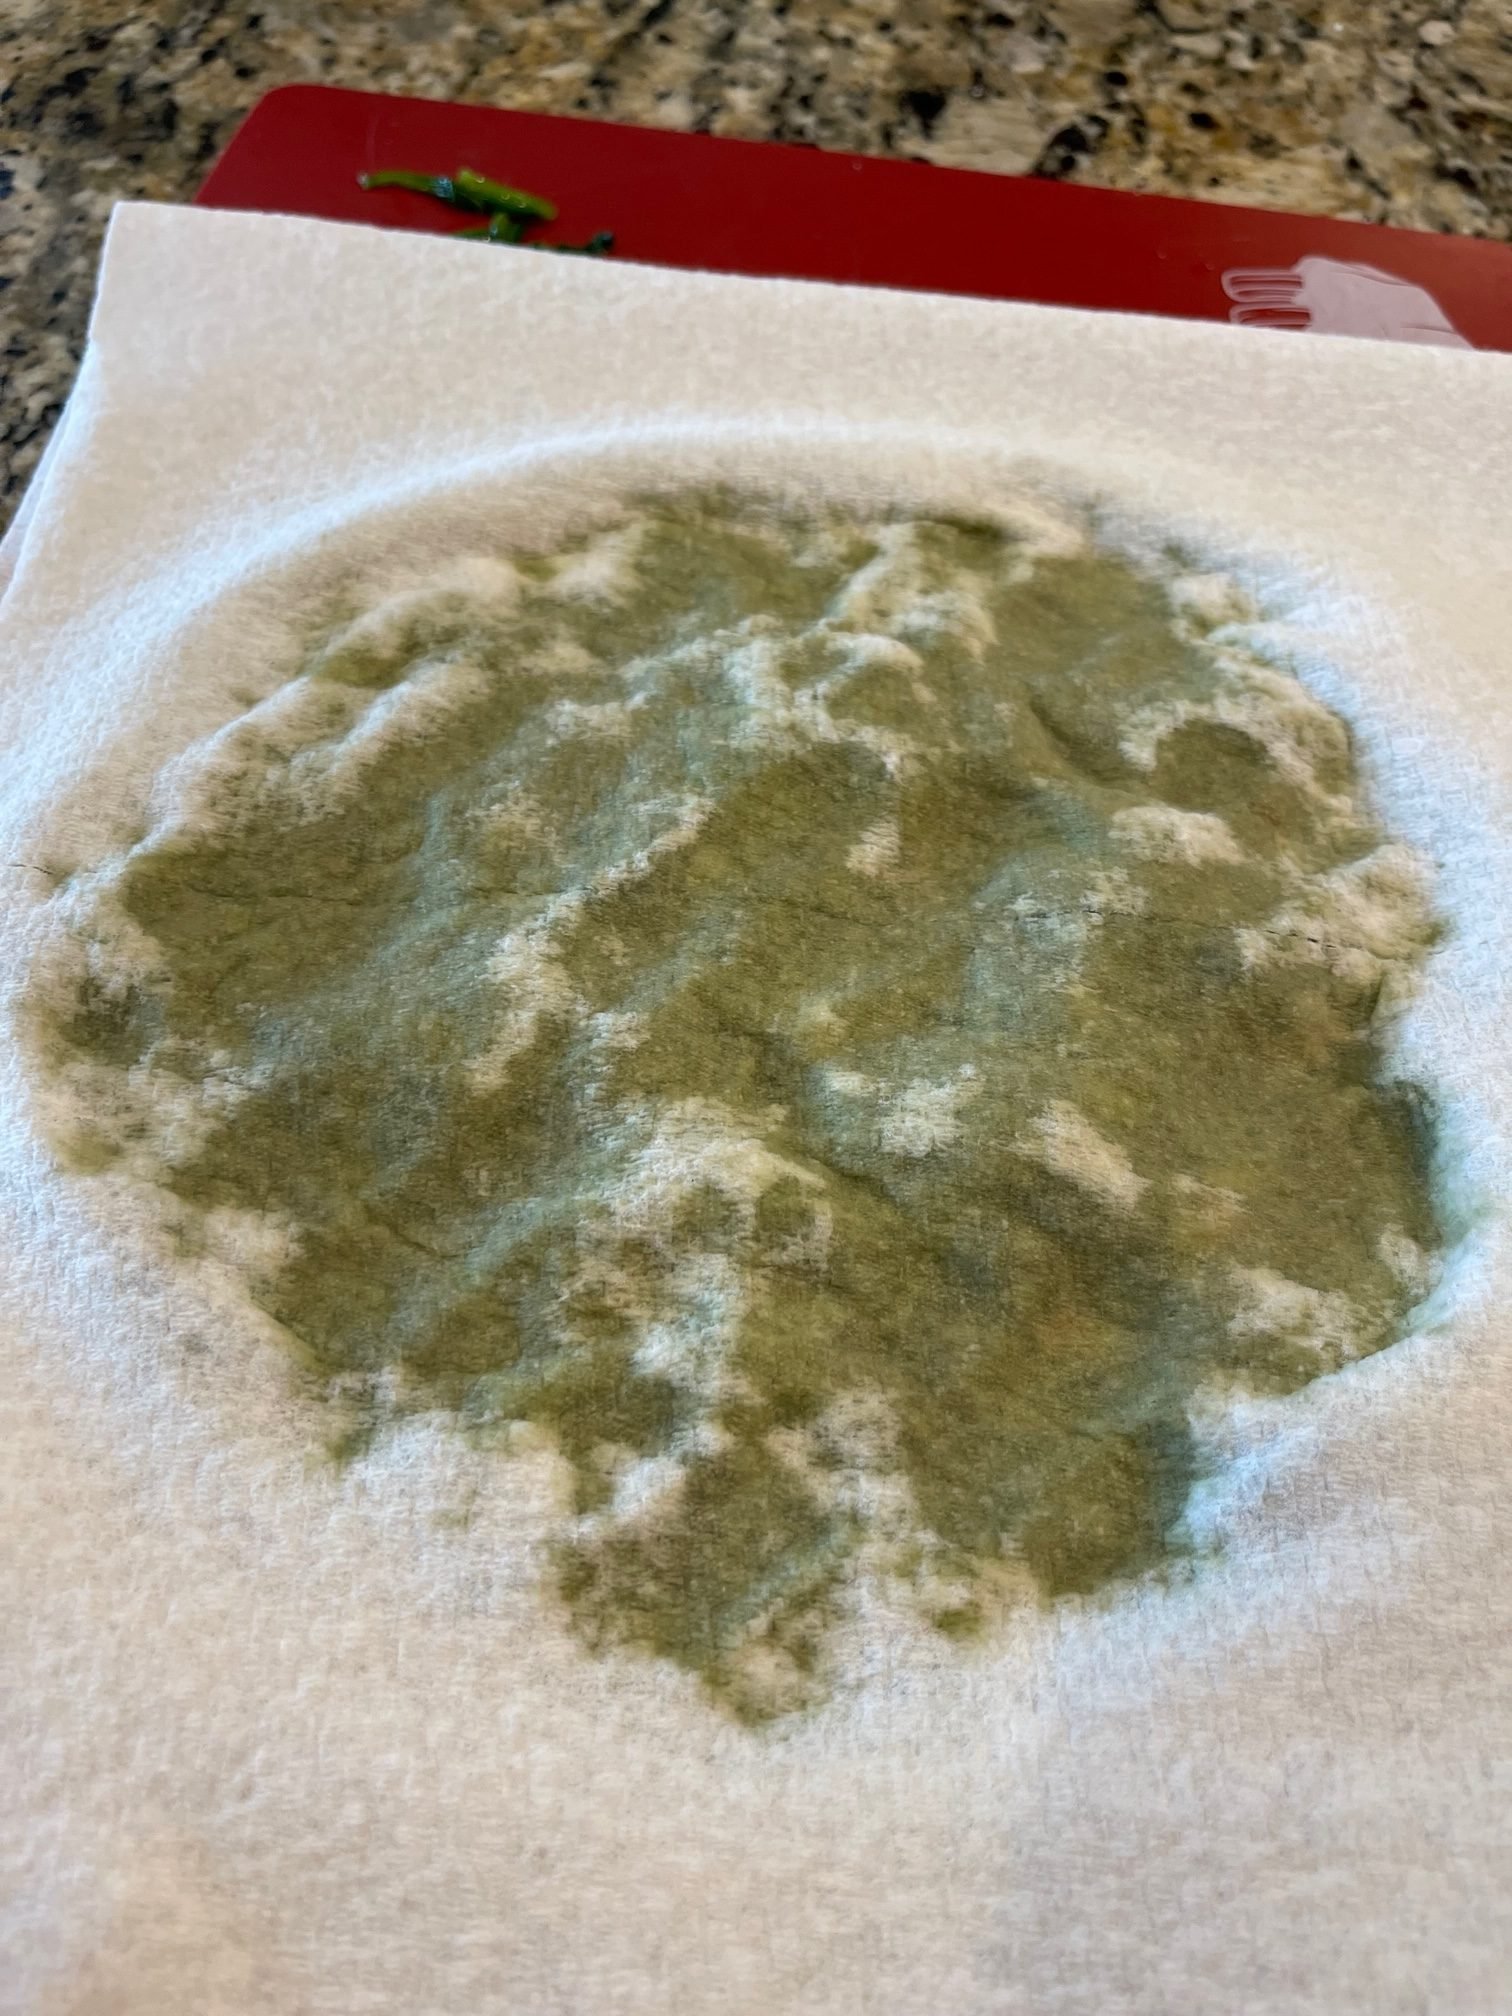 Use a paper towel to soak up the excess liquid from the cooked spinach